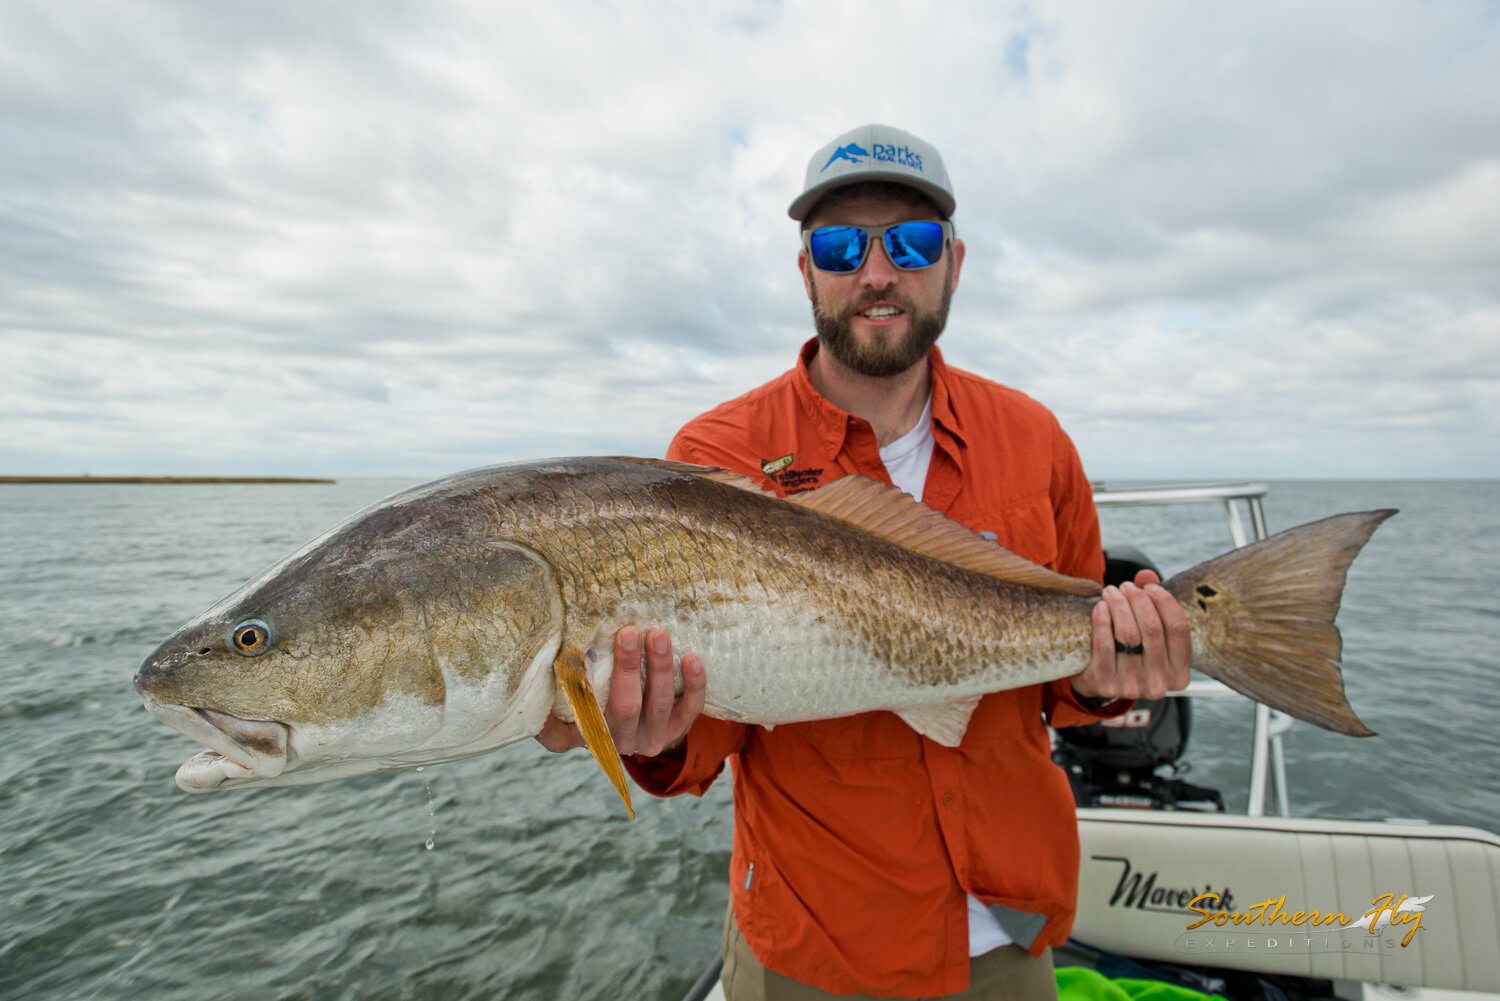 2019-11-26_SouthernFlyExpeditions_NewOrleans_TomHamiltonGroup-TomAndSean-3.jpg